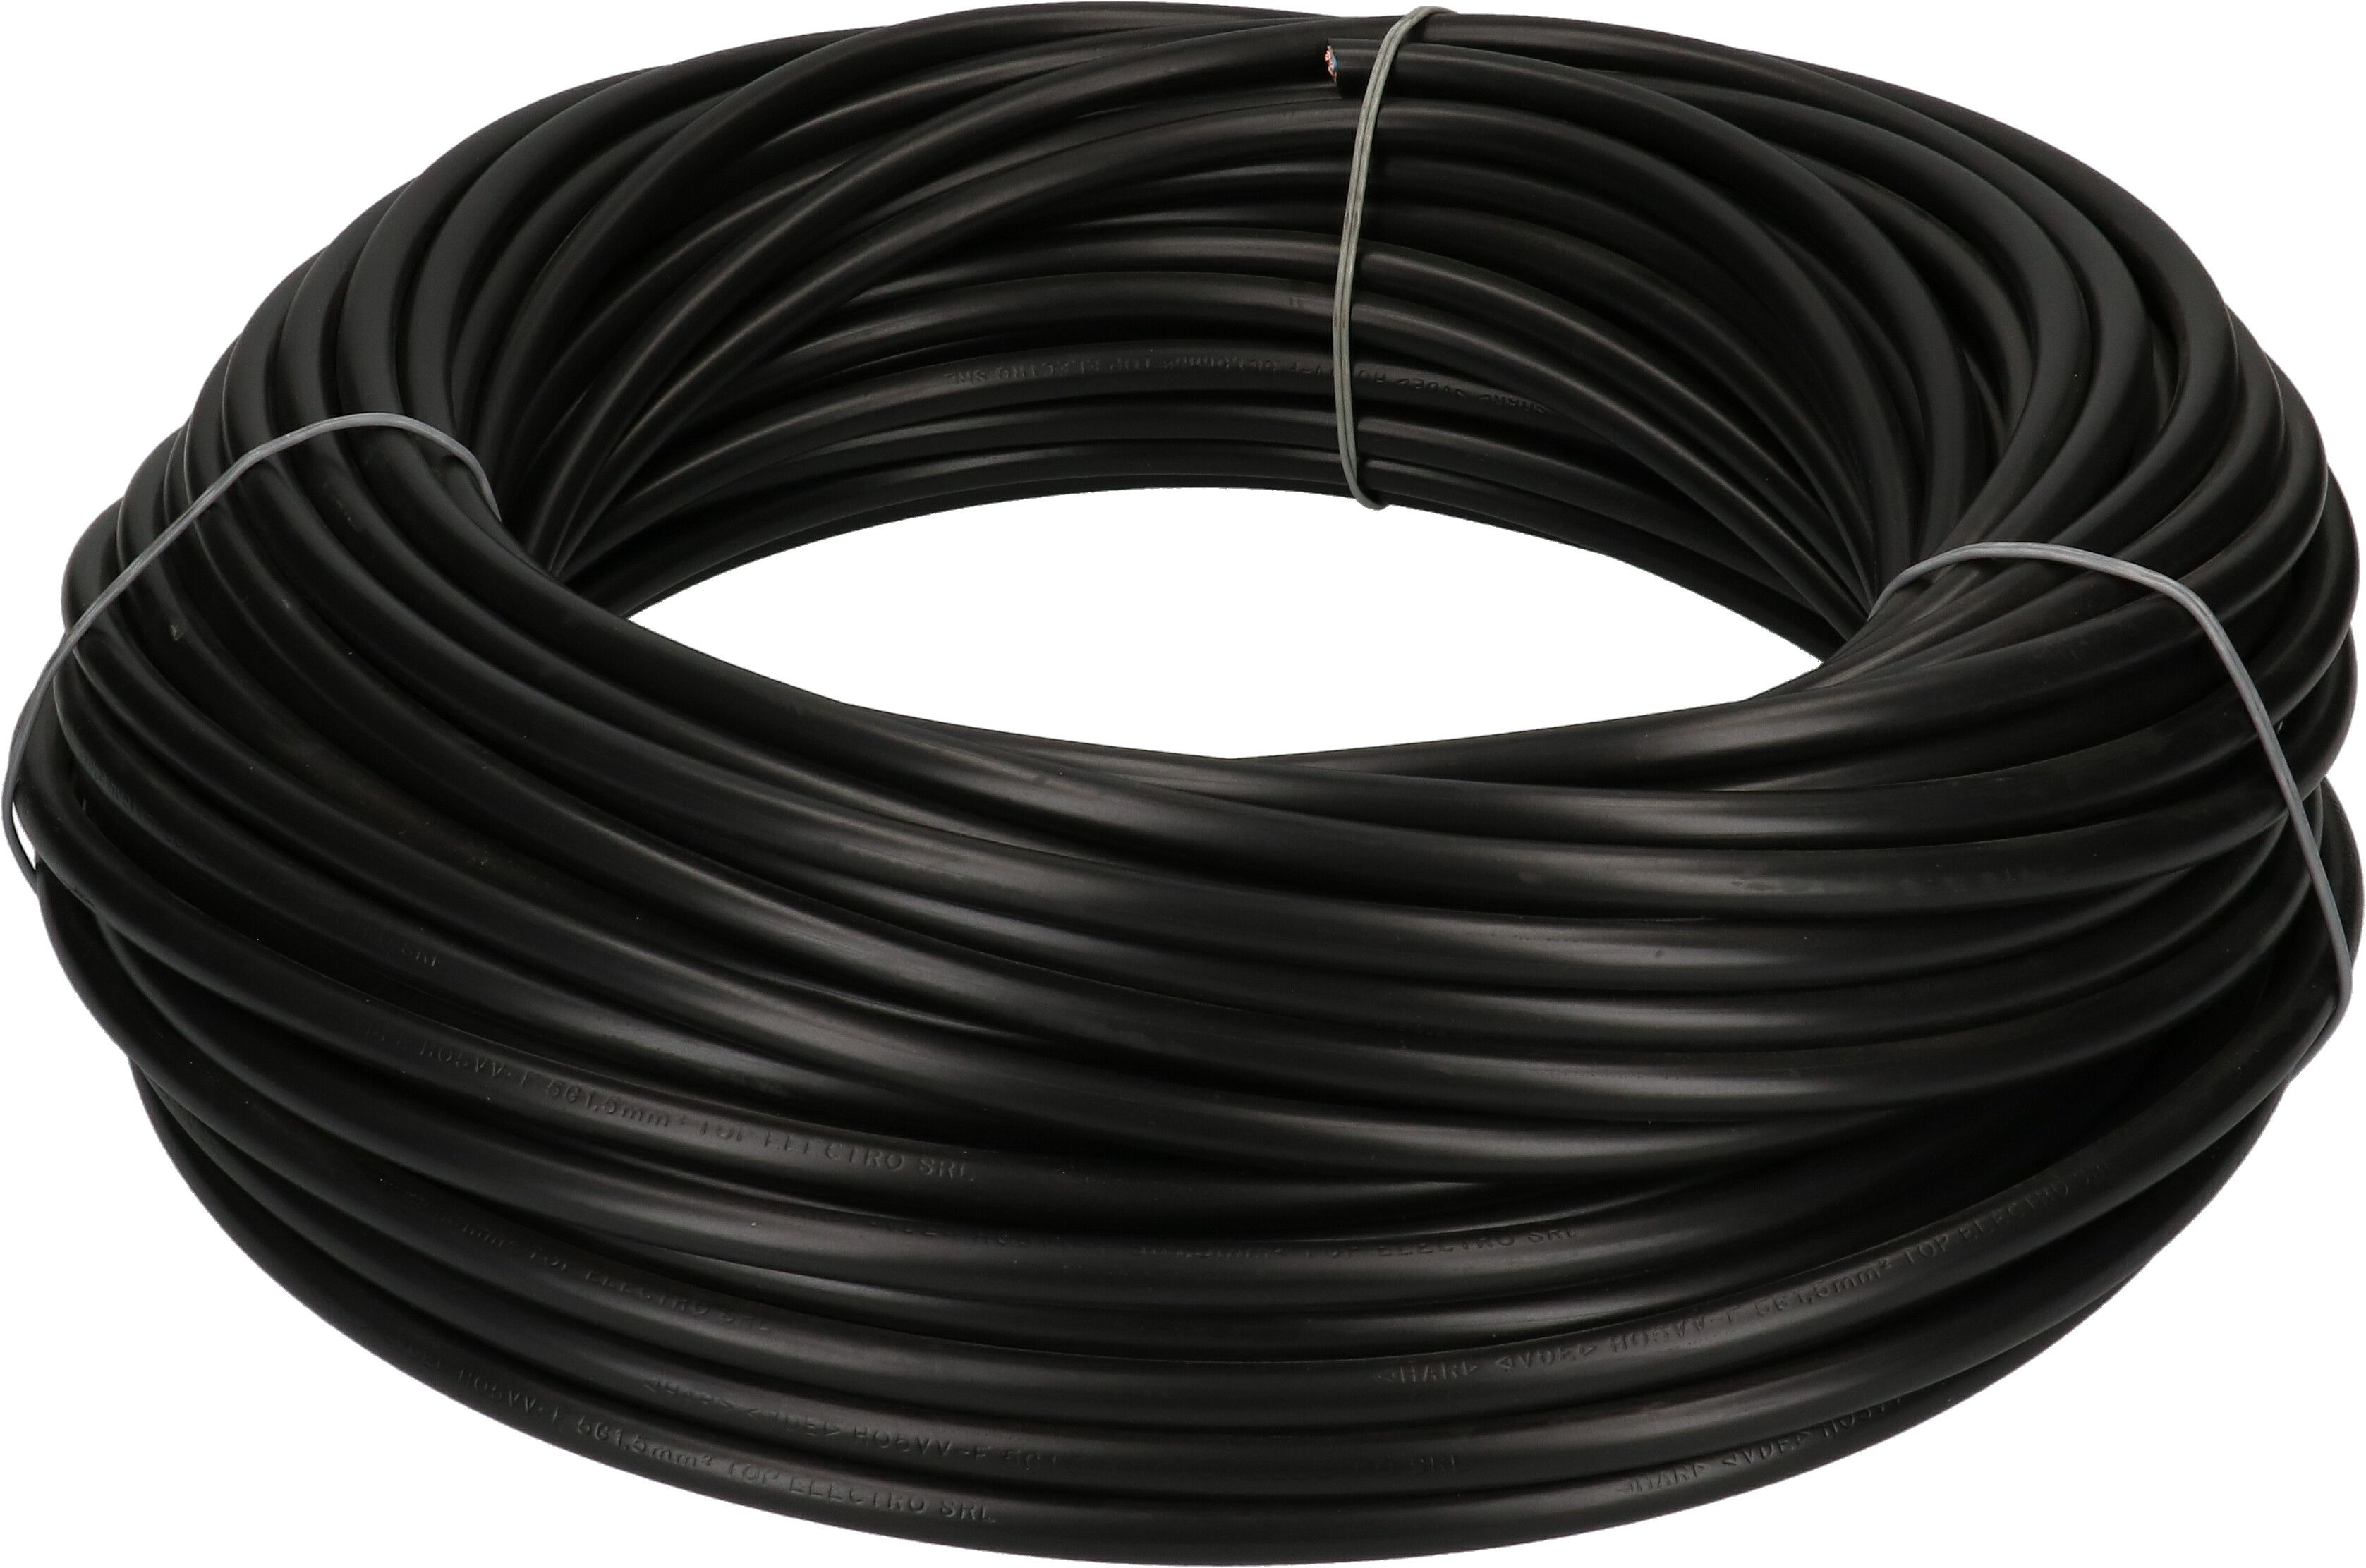 Cable H05VV-F5G1,5mm2 black RAL 9005